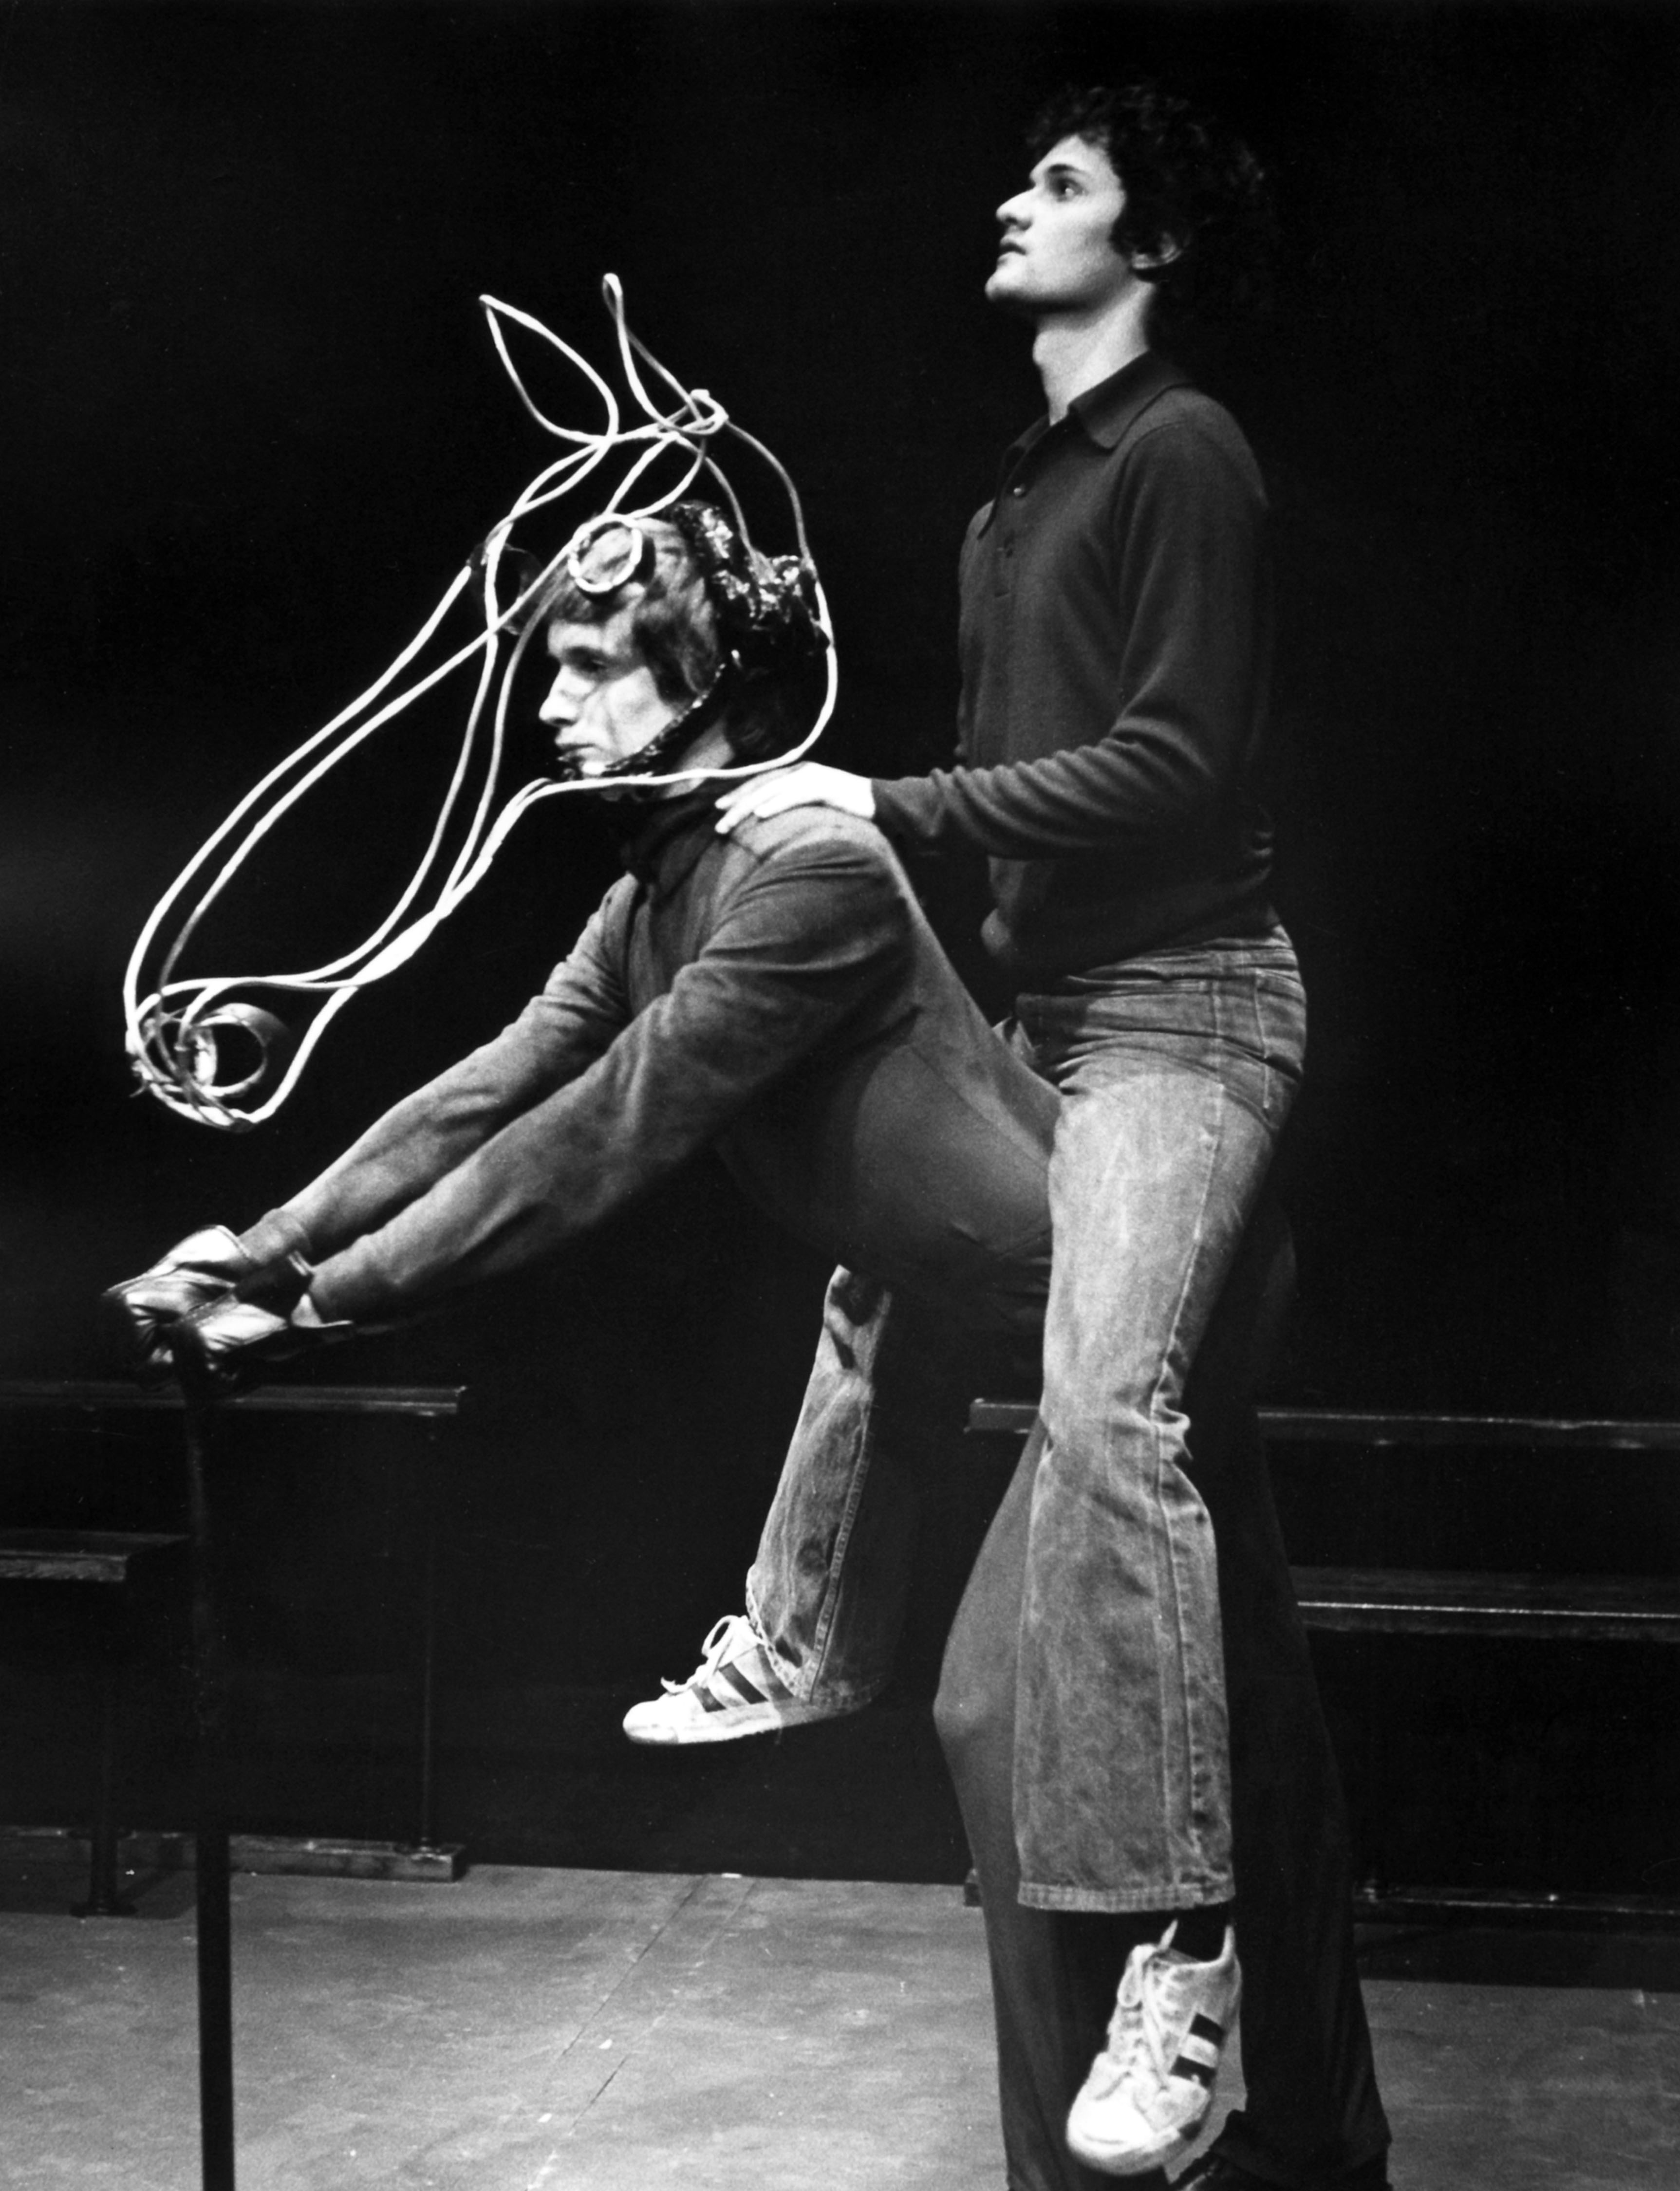 black and white photograph of two people in theatrical production, one person portraying a horse while the other person sits on their back